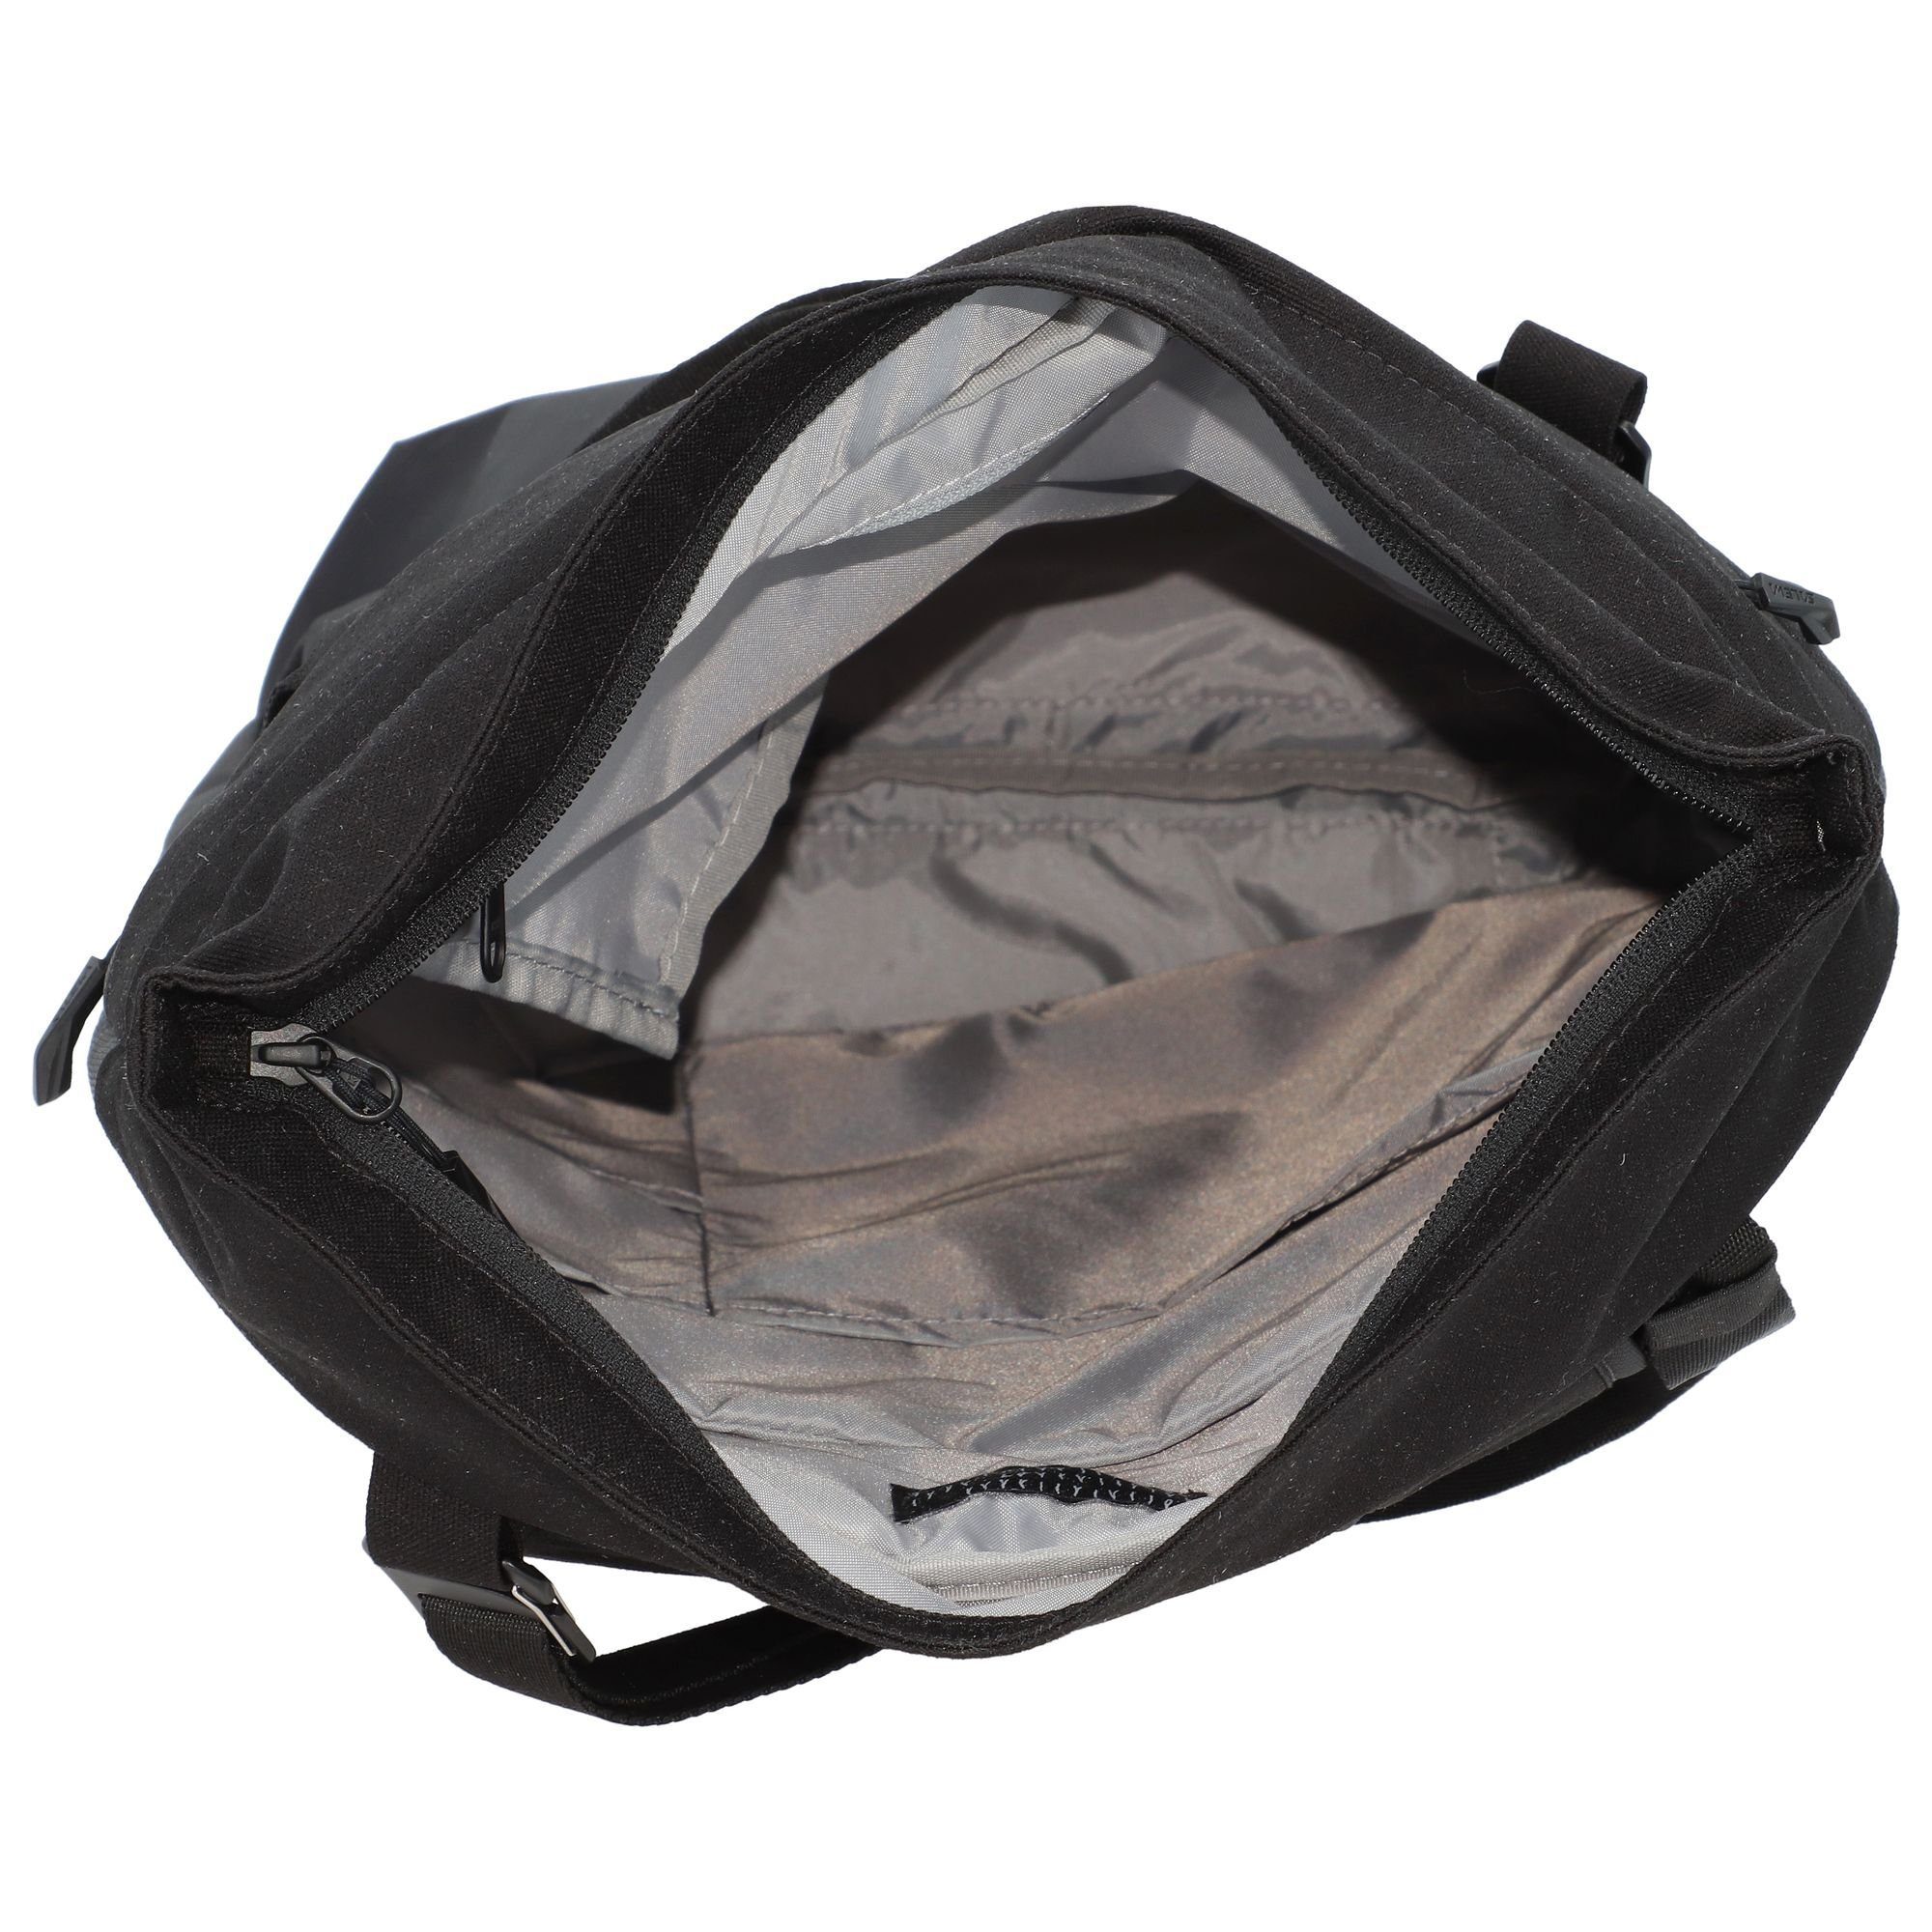 Salewa Schultertasche out Polyester black Fanes,